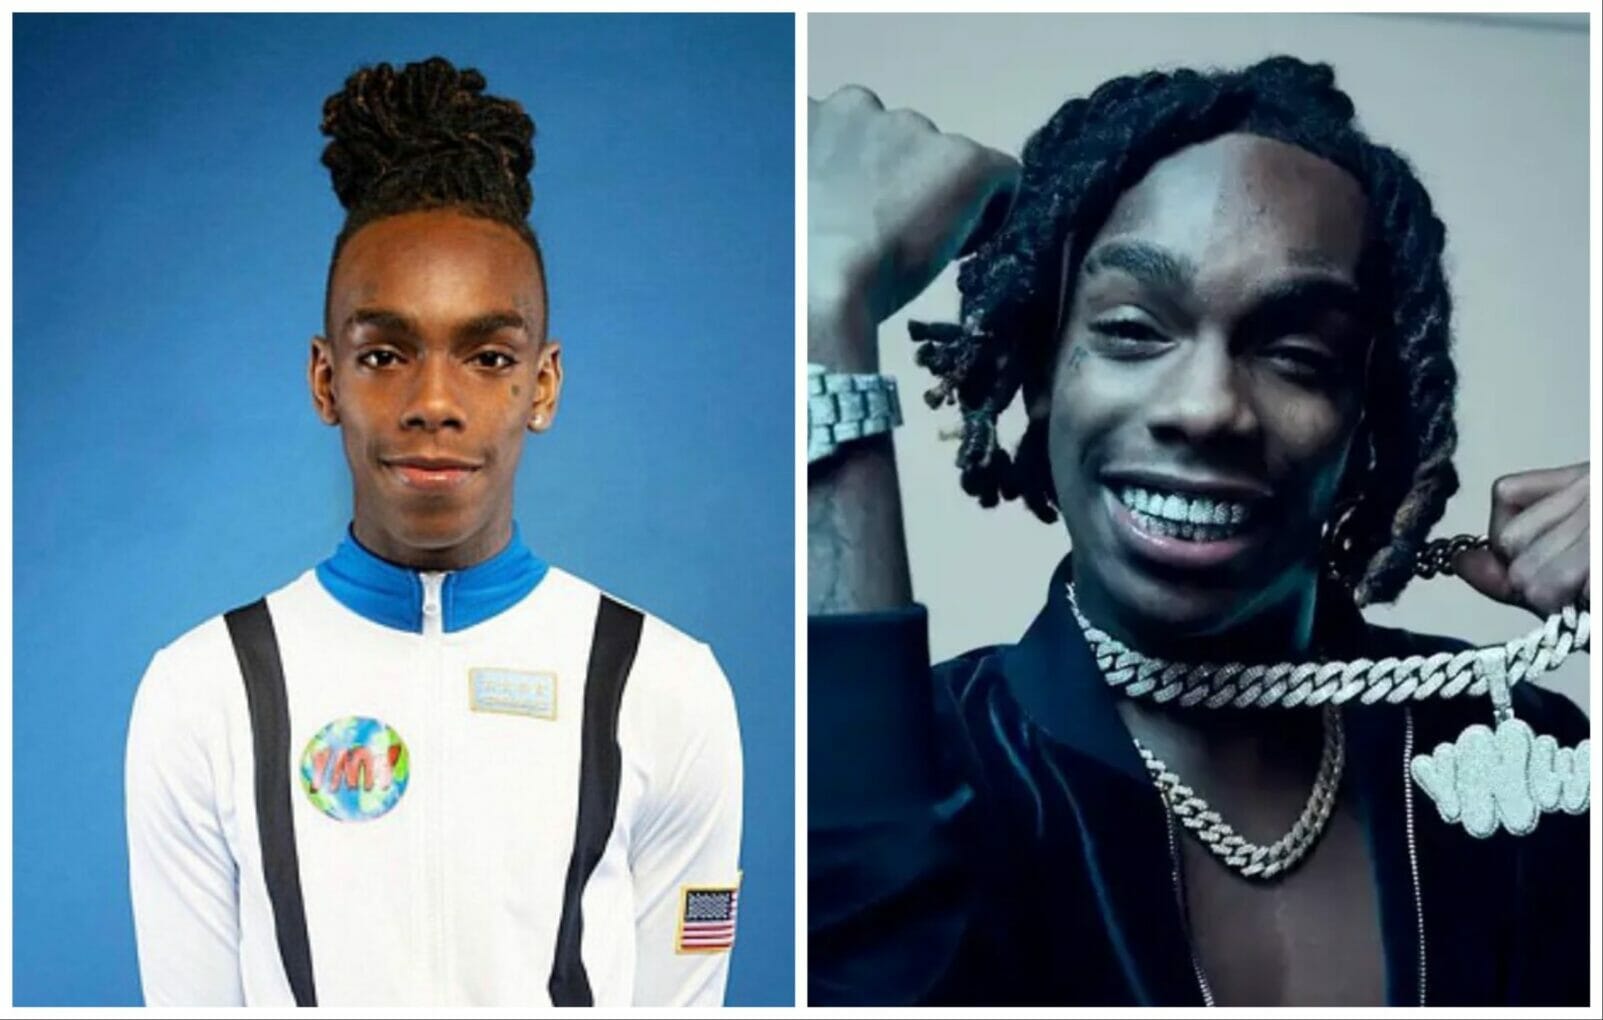 Who is YNW Melly?